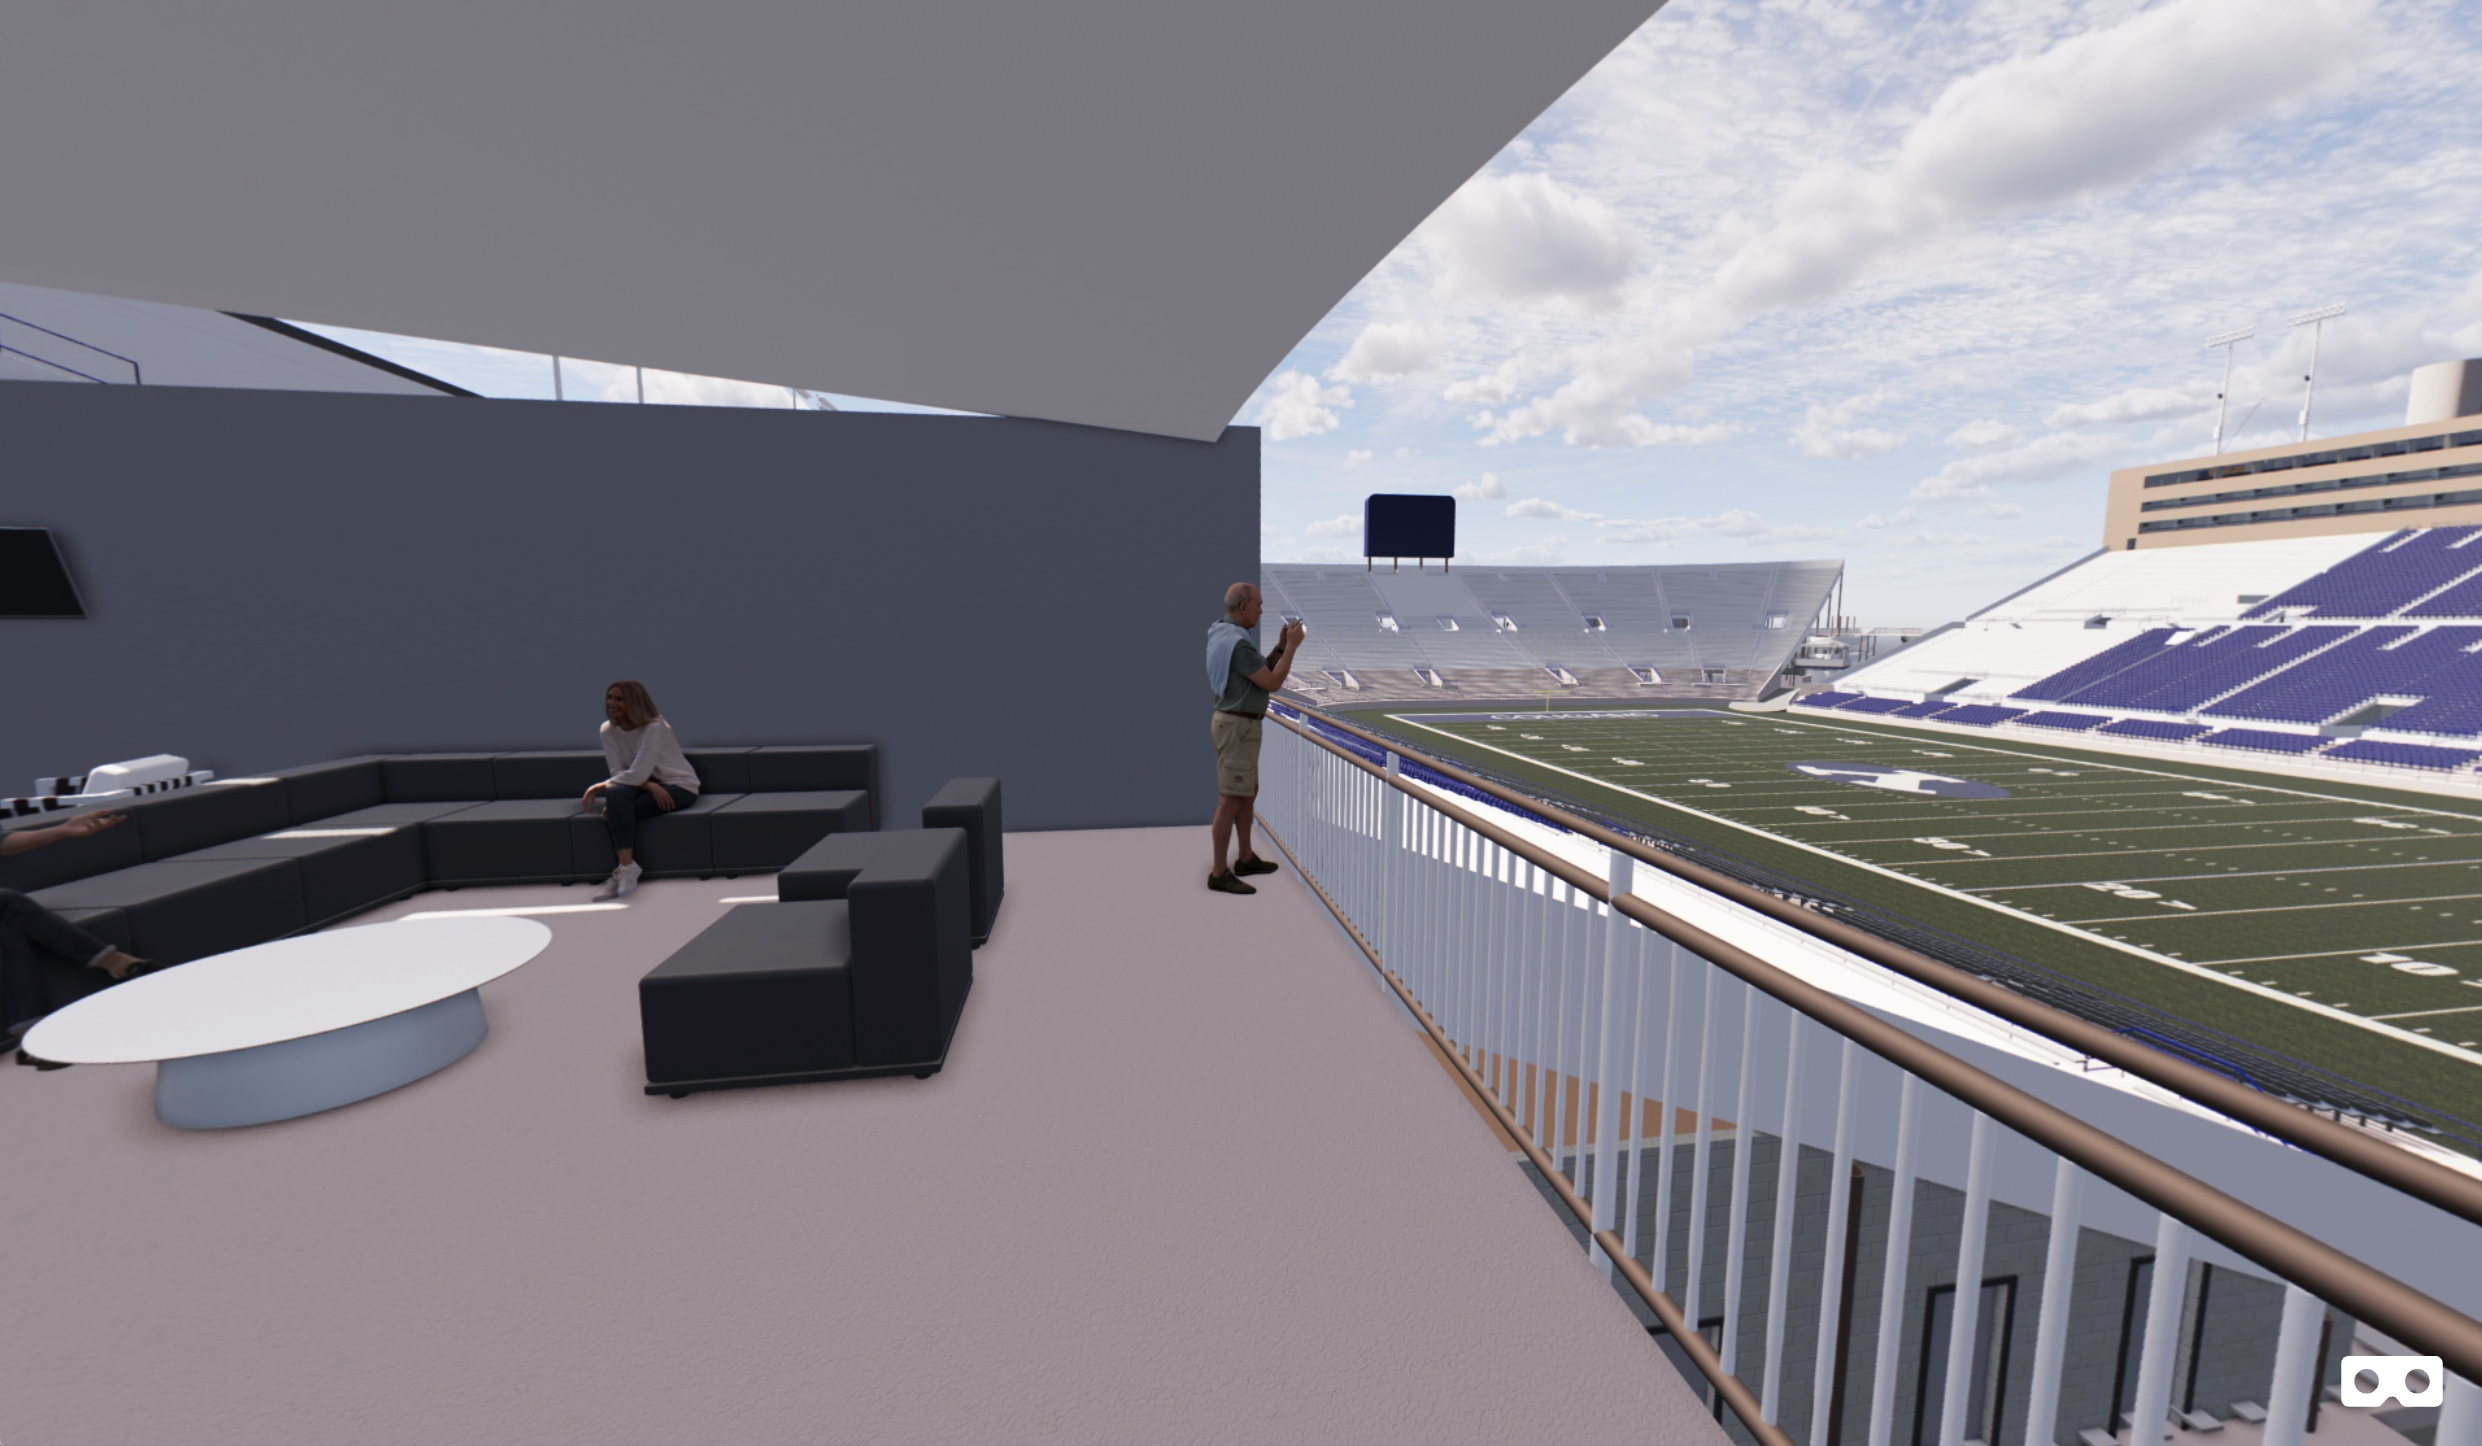 An artist rendering of the view from Champions Terrace onto the field in LaVell Edwards Stadium